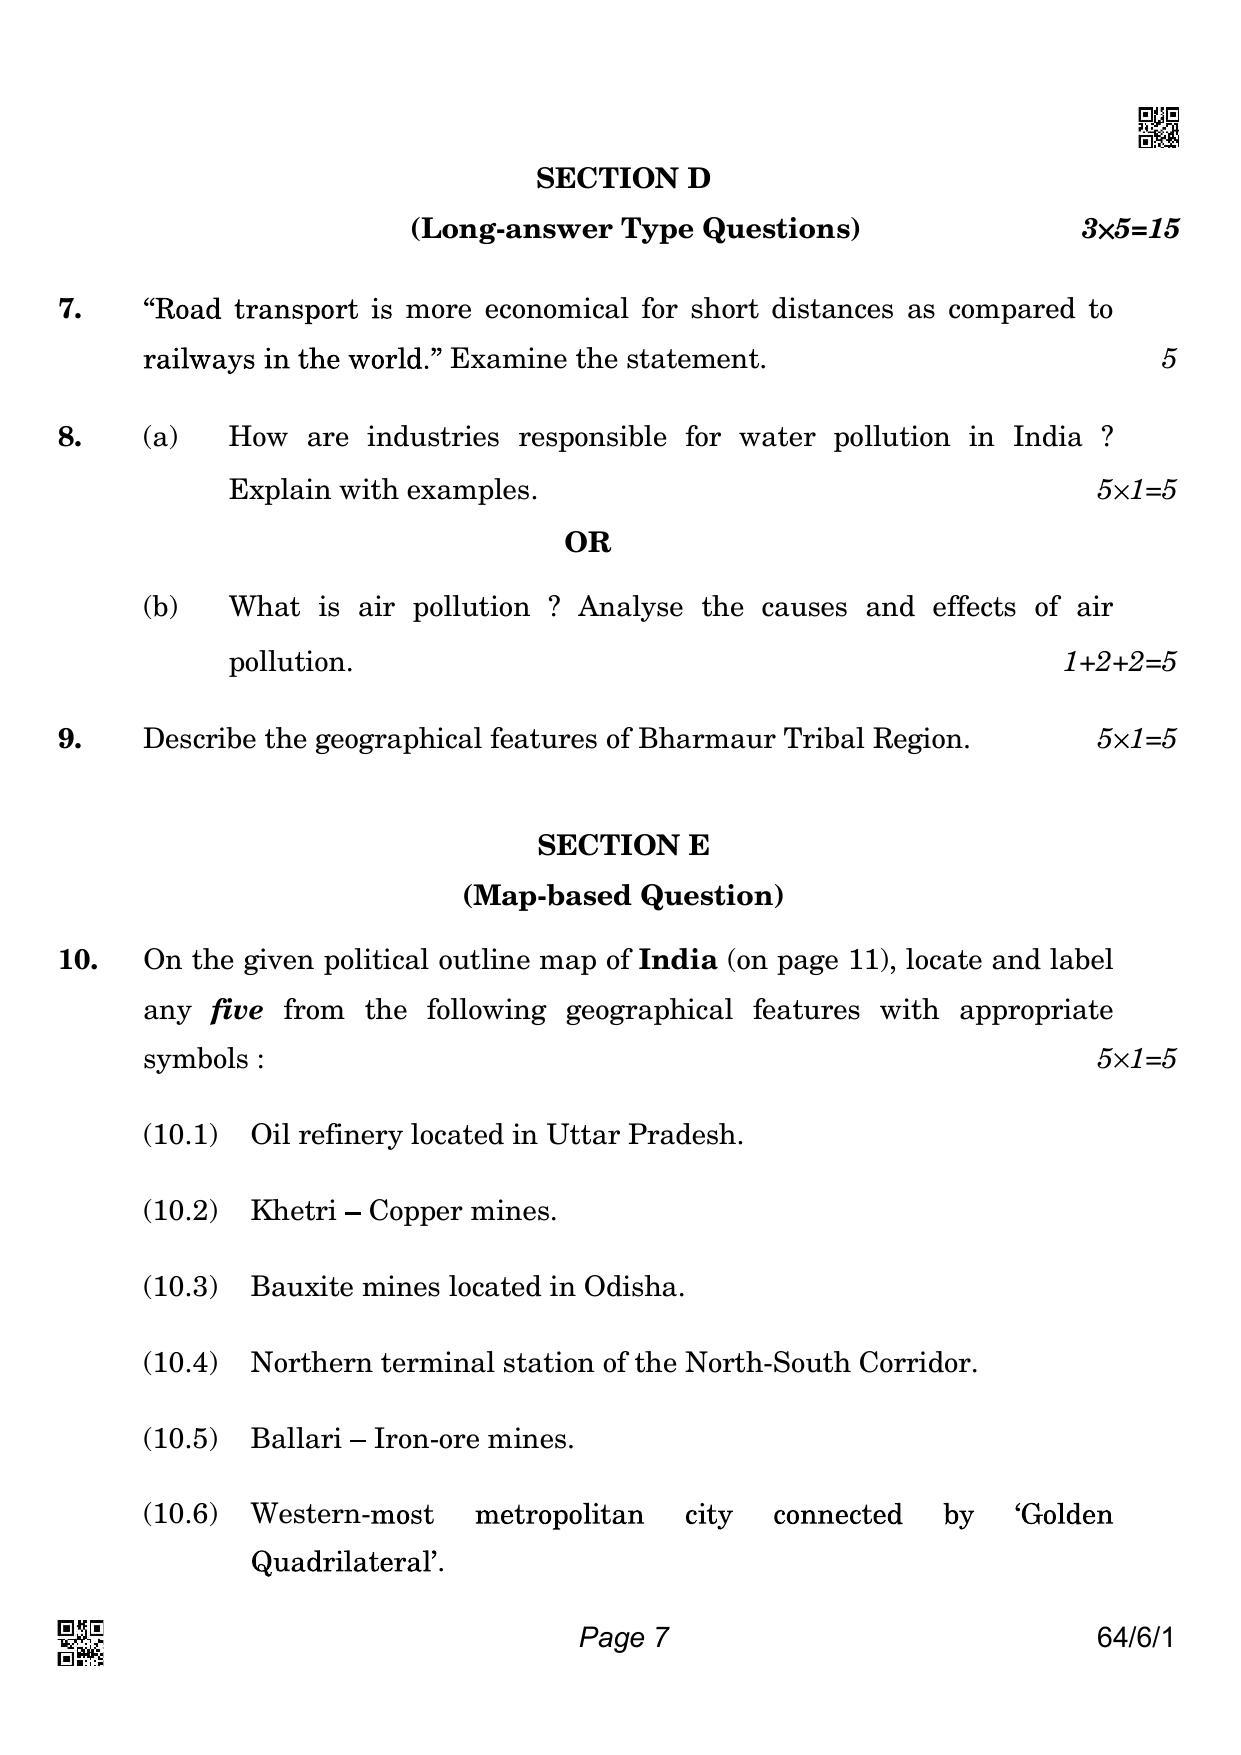 CBSE Class 12 64-6-1 GEOGRAPHY 2022 Compartment Question Paper - Page 7